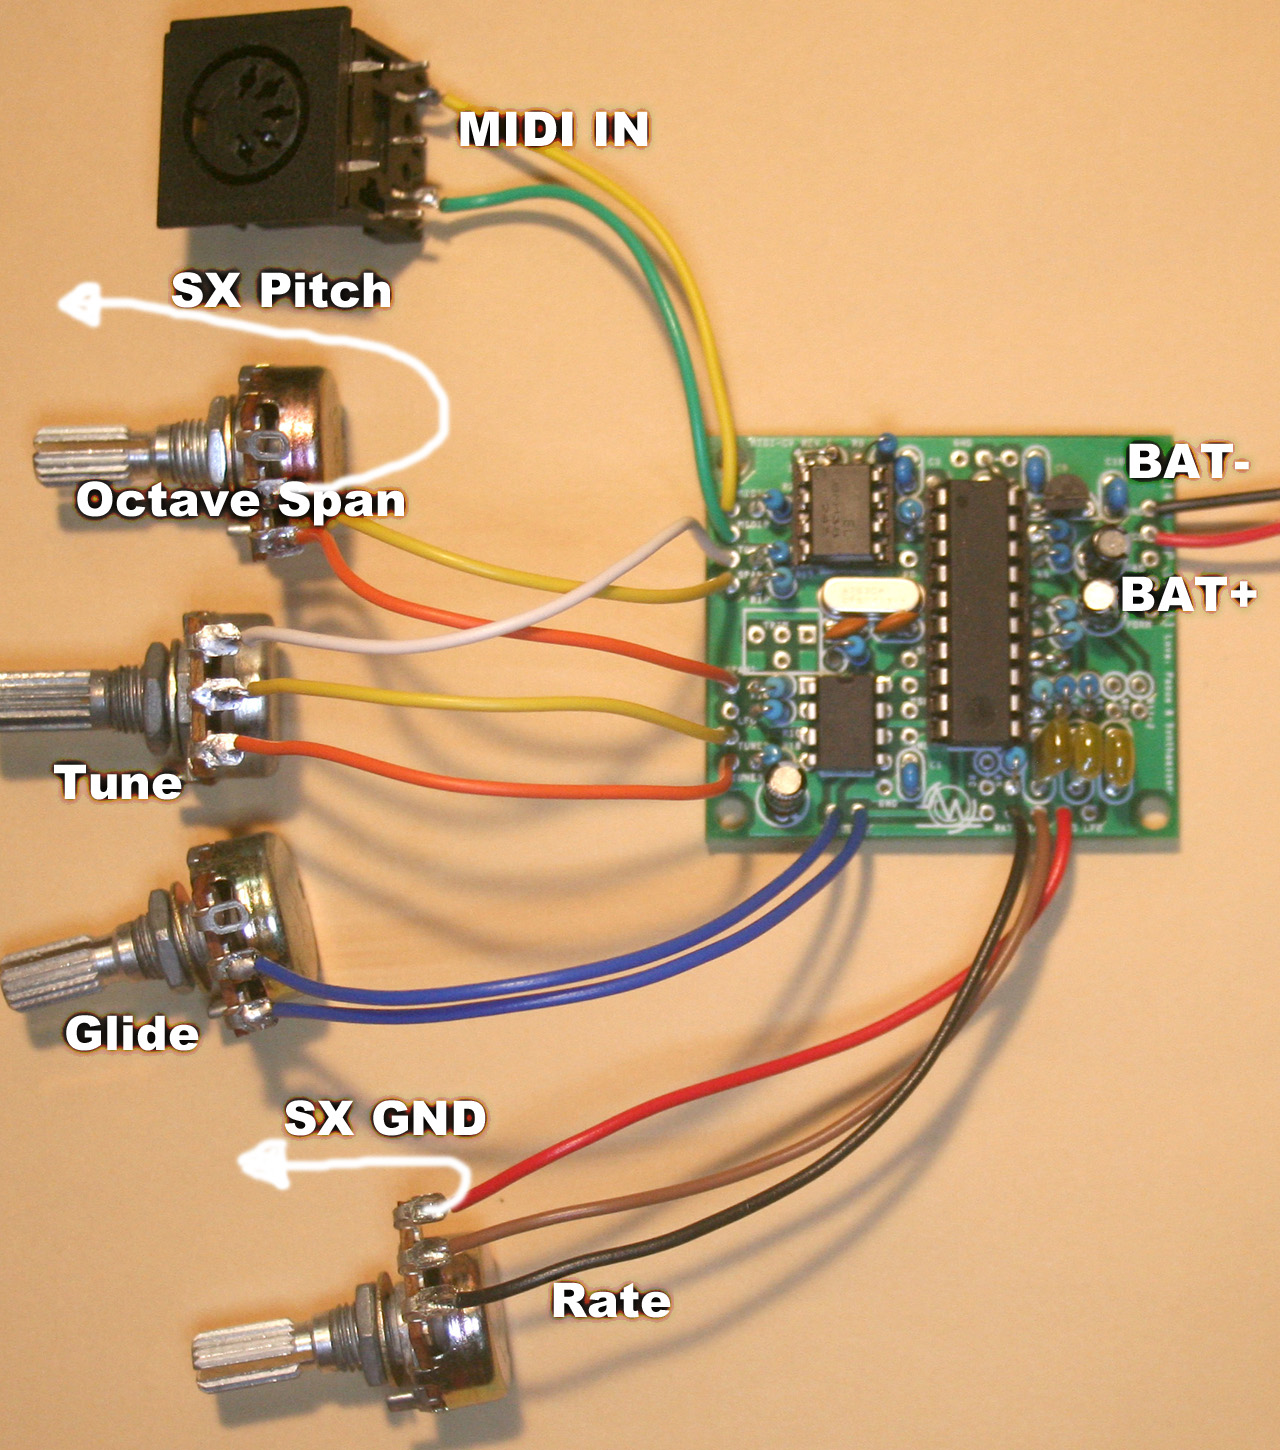 Wiring for SX-150 configuration